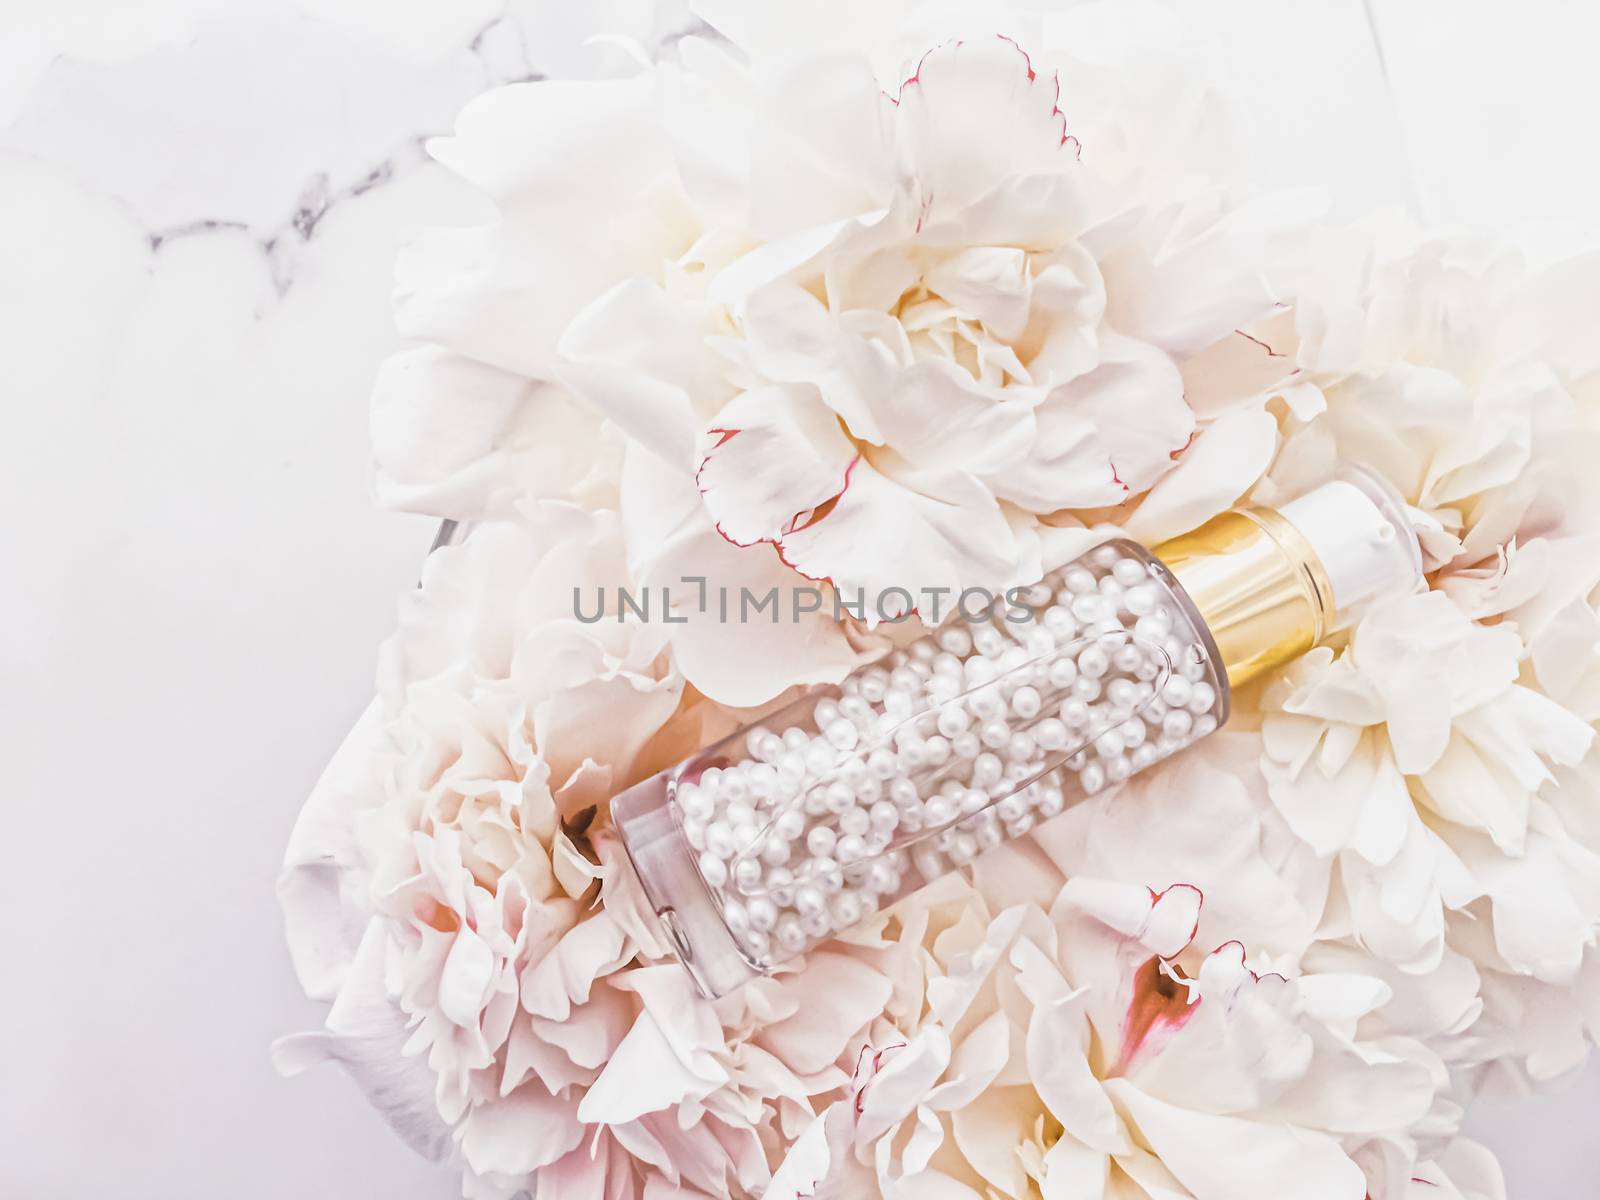 Luxurious cosmetic bottle as antiaging skincare product on background of flowers, blank label packaging for body care branding by Anneleven